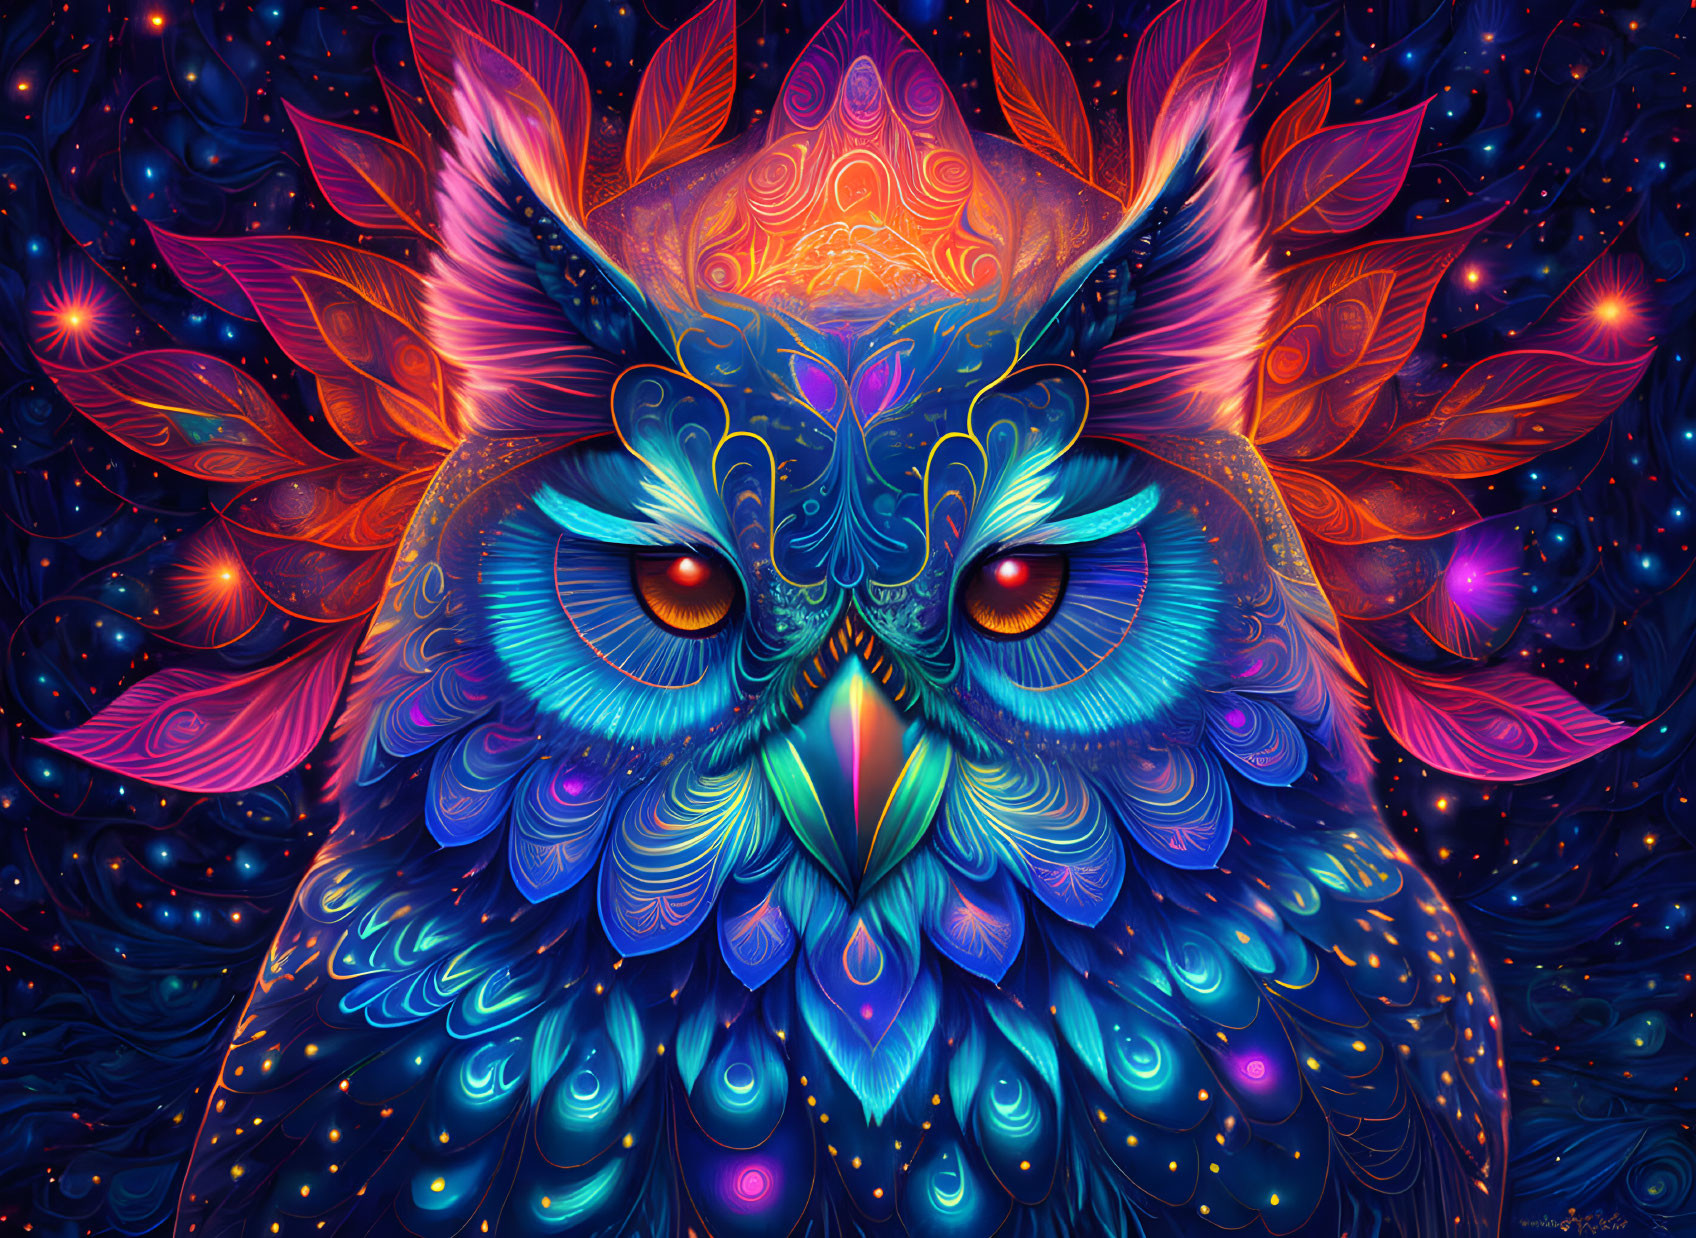 Colorful owl digital art with cosmic background in blues, purples, and oranges